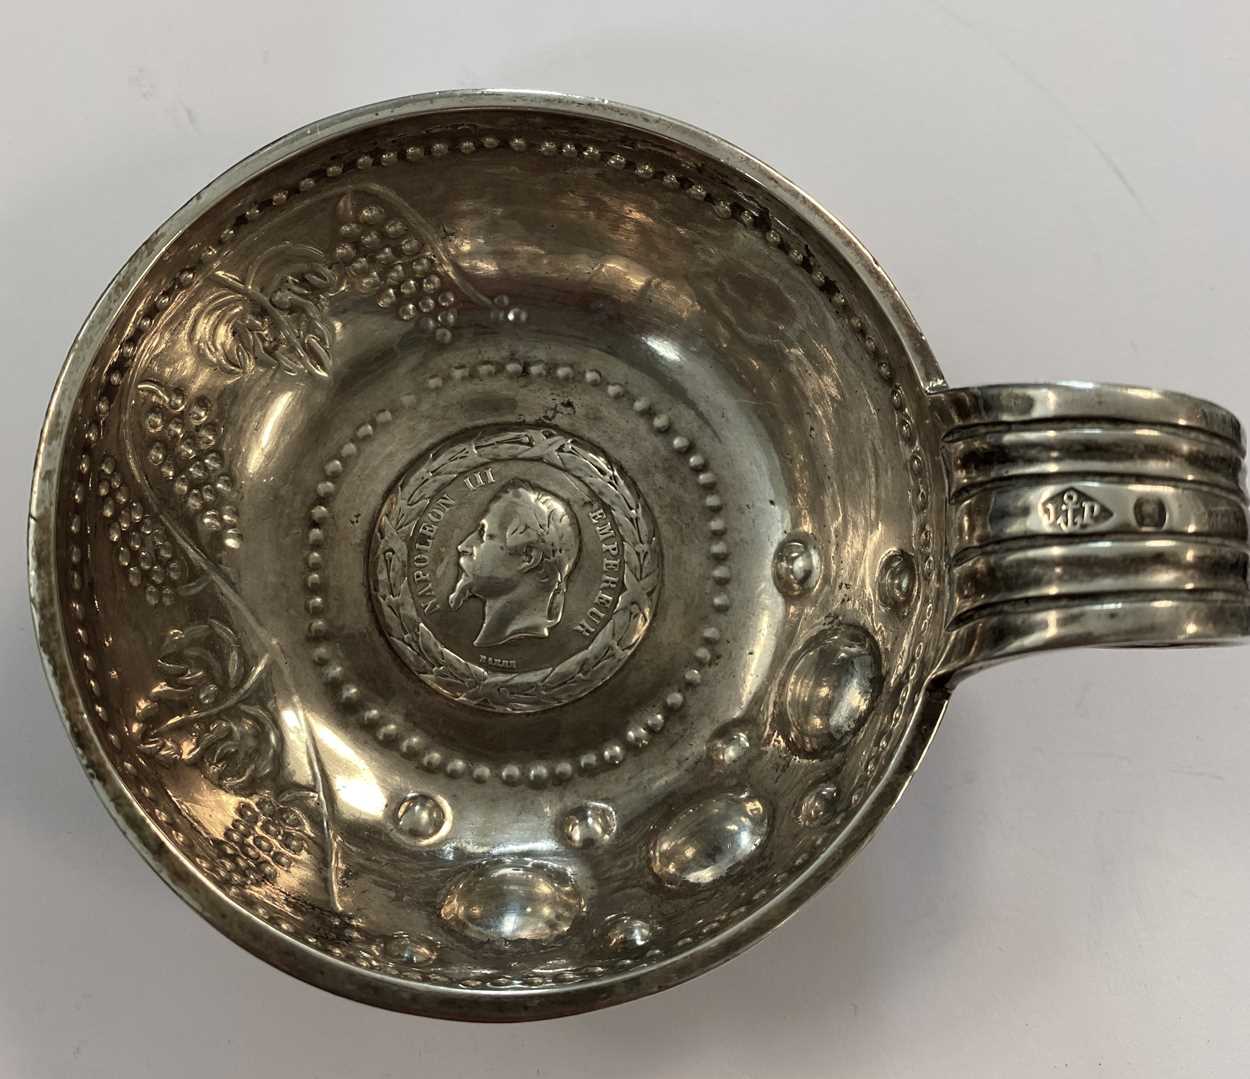 A mid-19th century French metalwares silver tastevin, - Image 6 of 8